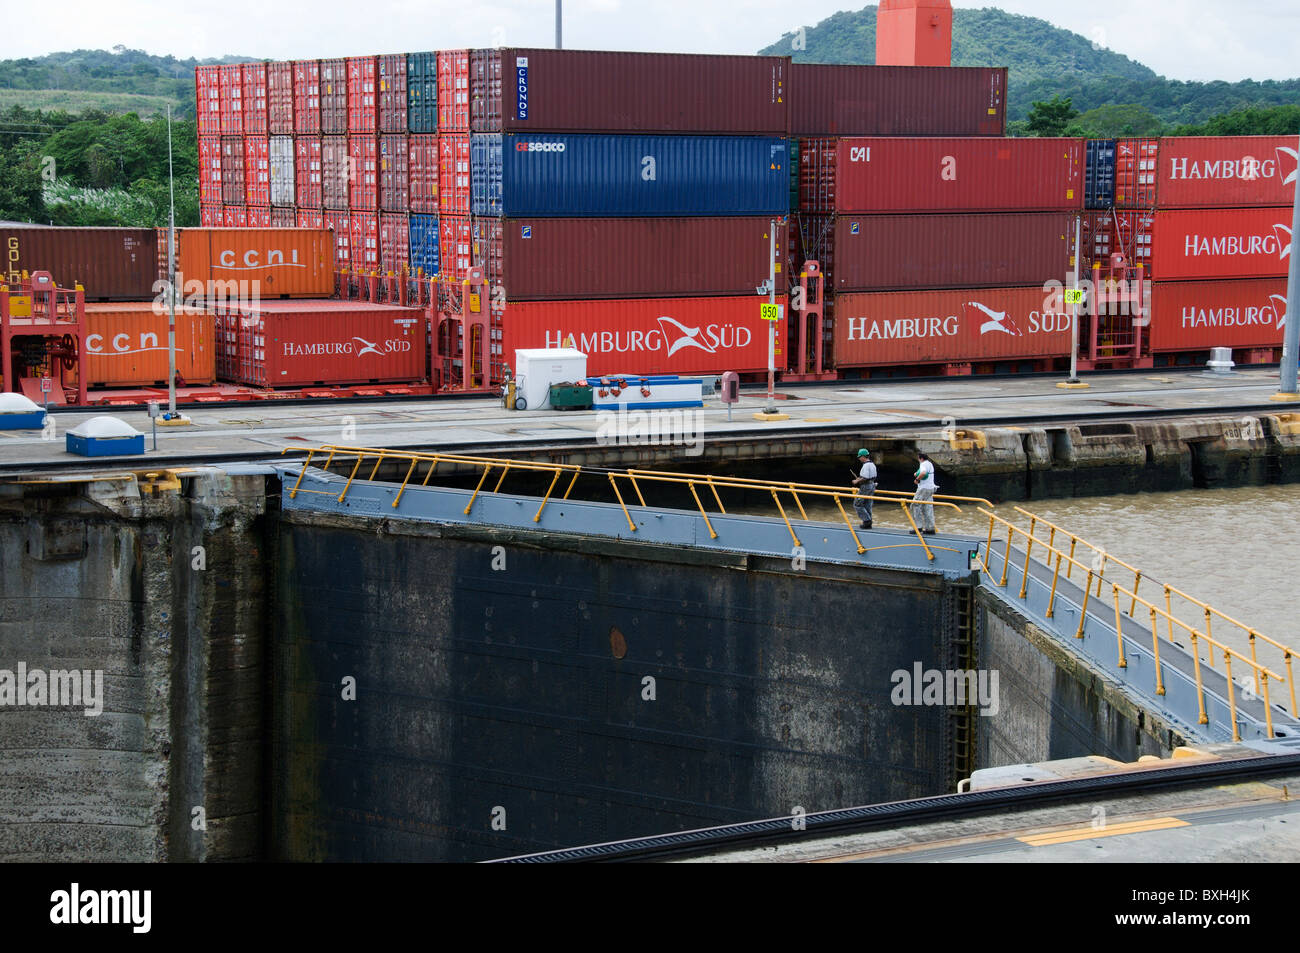 A fully loaded cargo ship filled with containers moves through the Miraflores Locks in the Panama Canal. Stock Photo